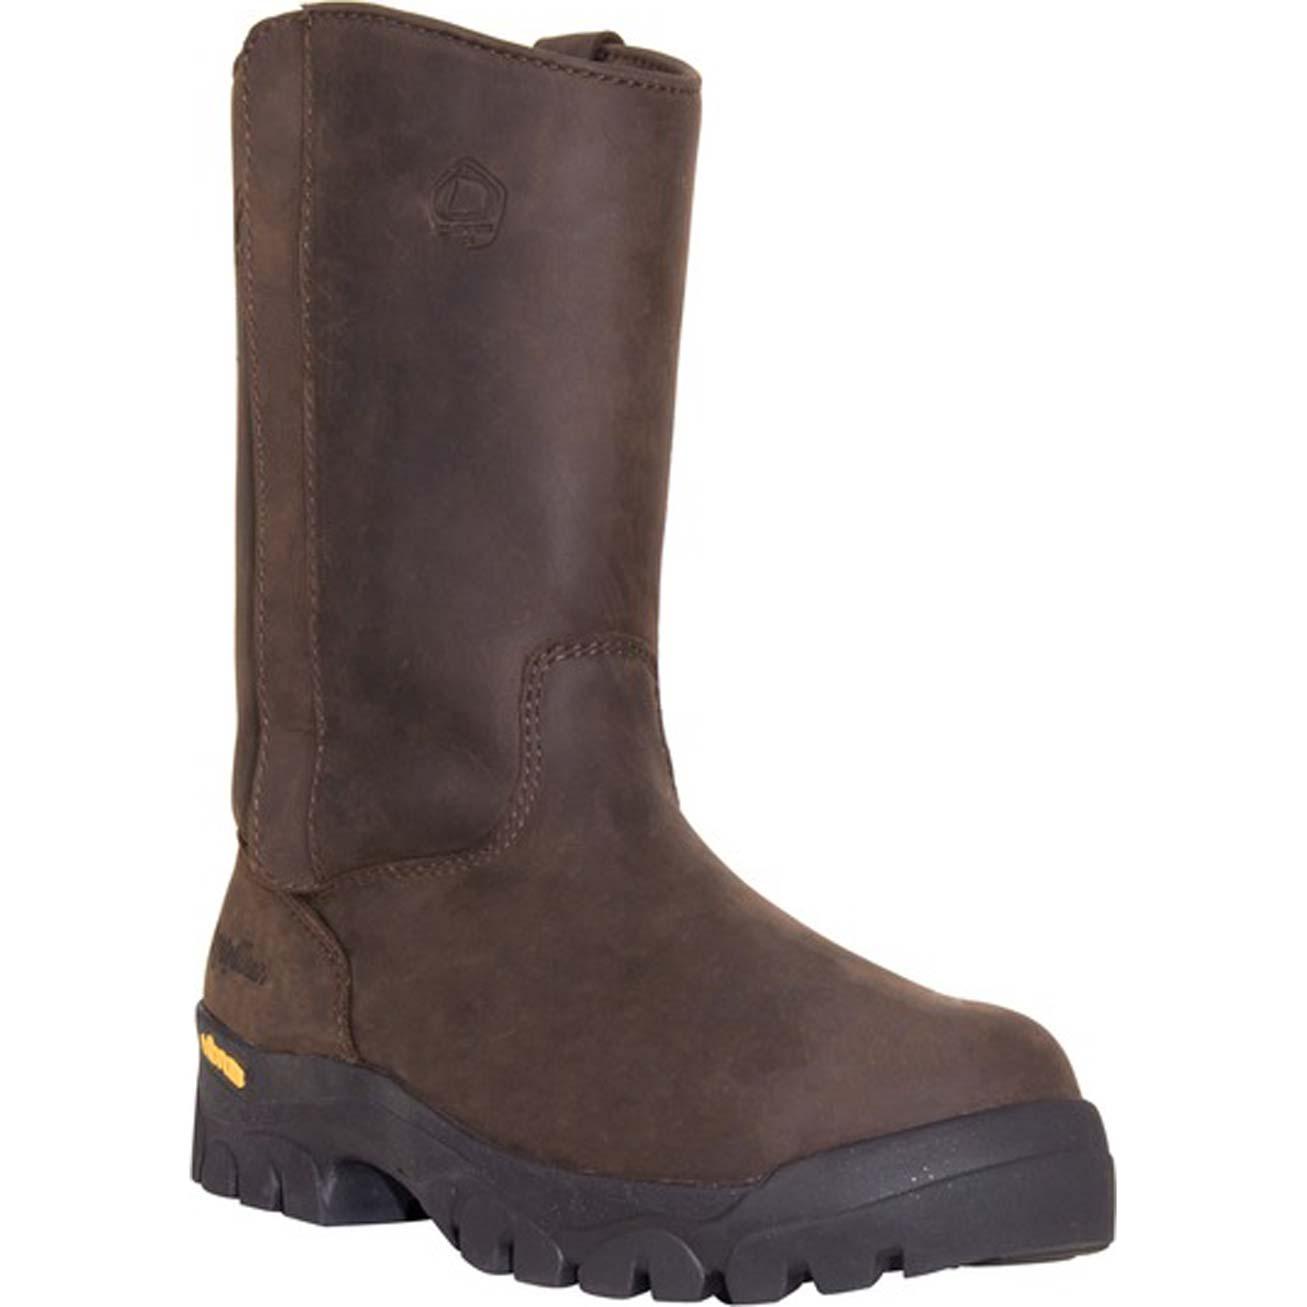 RefrigiWear Resistor Composite Toe 200g Insulated Pull-On Work Boot, RF141C